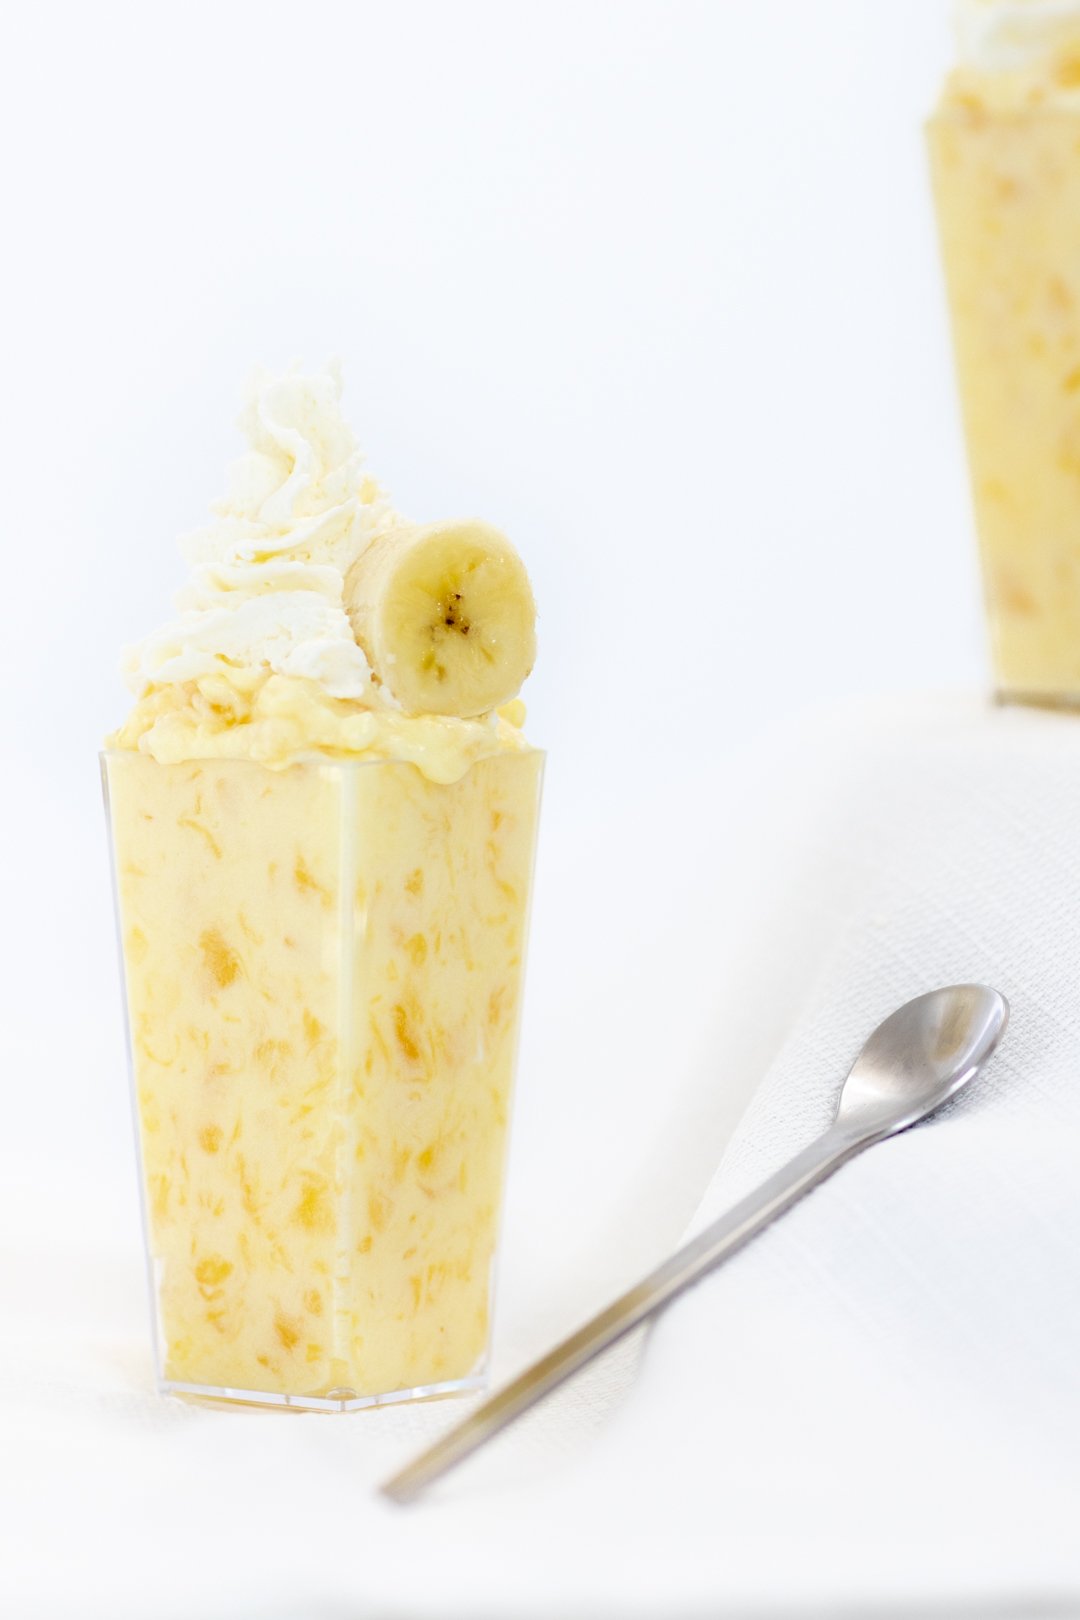 pineapple pudding topped with banana and whipped cream